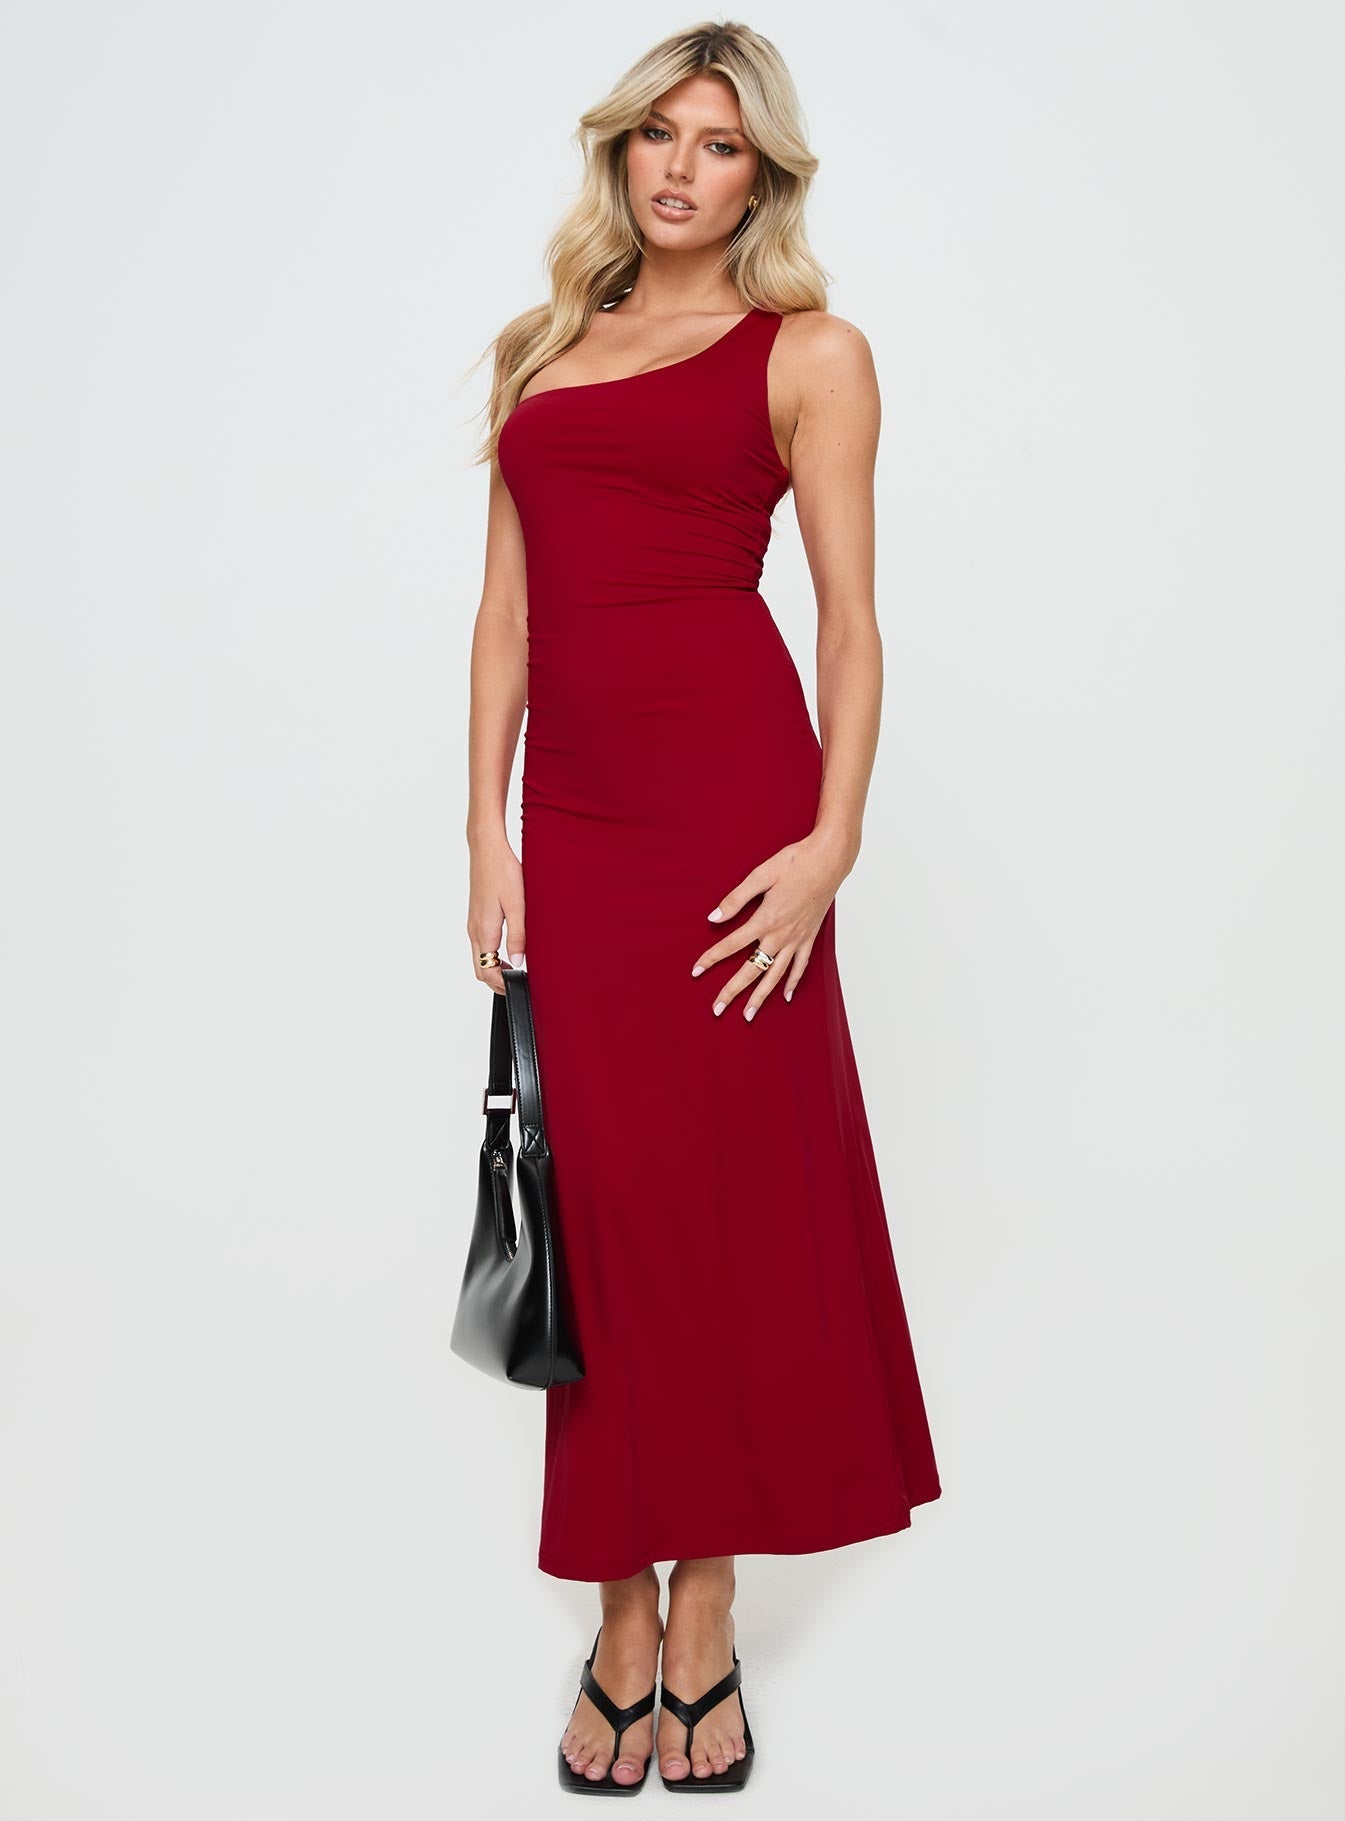 Shop Formal Dress - Smithy Maxi Dress Red fourth image